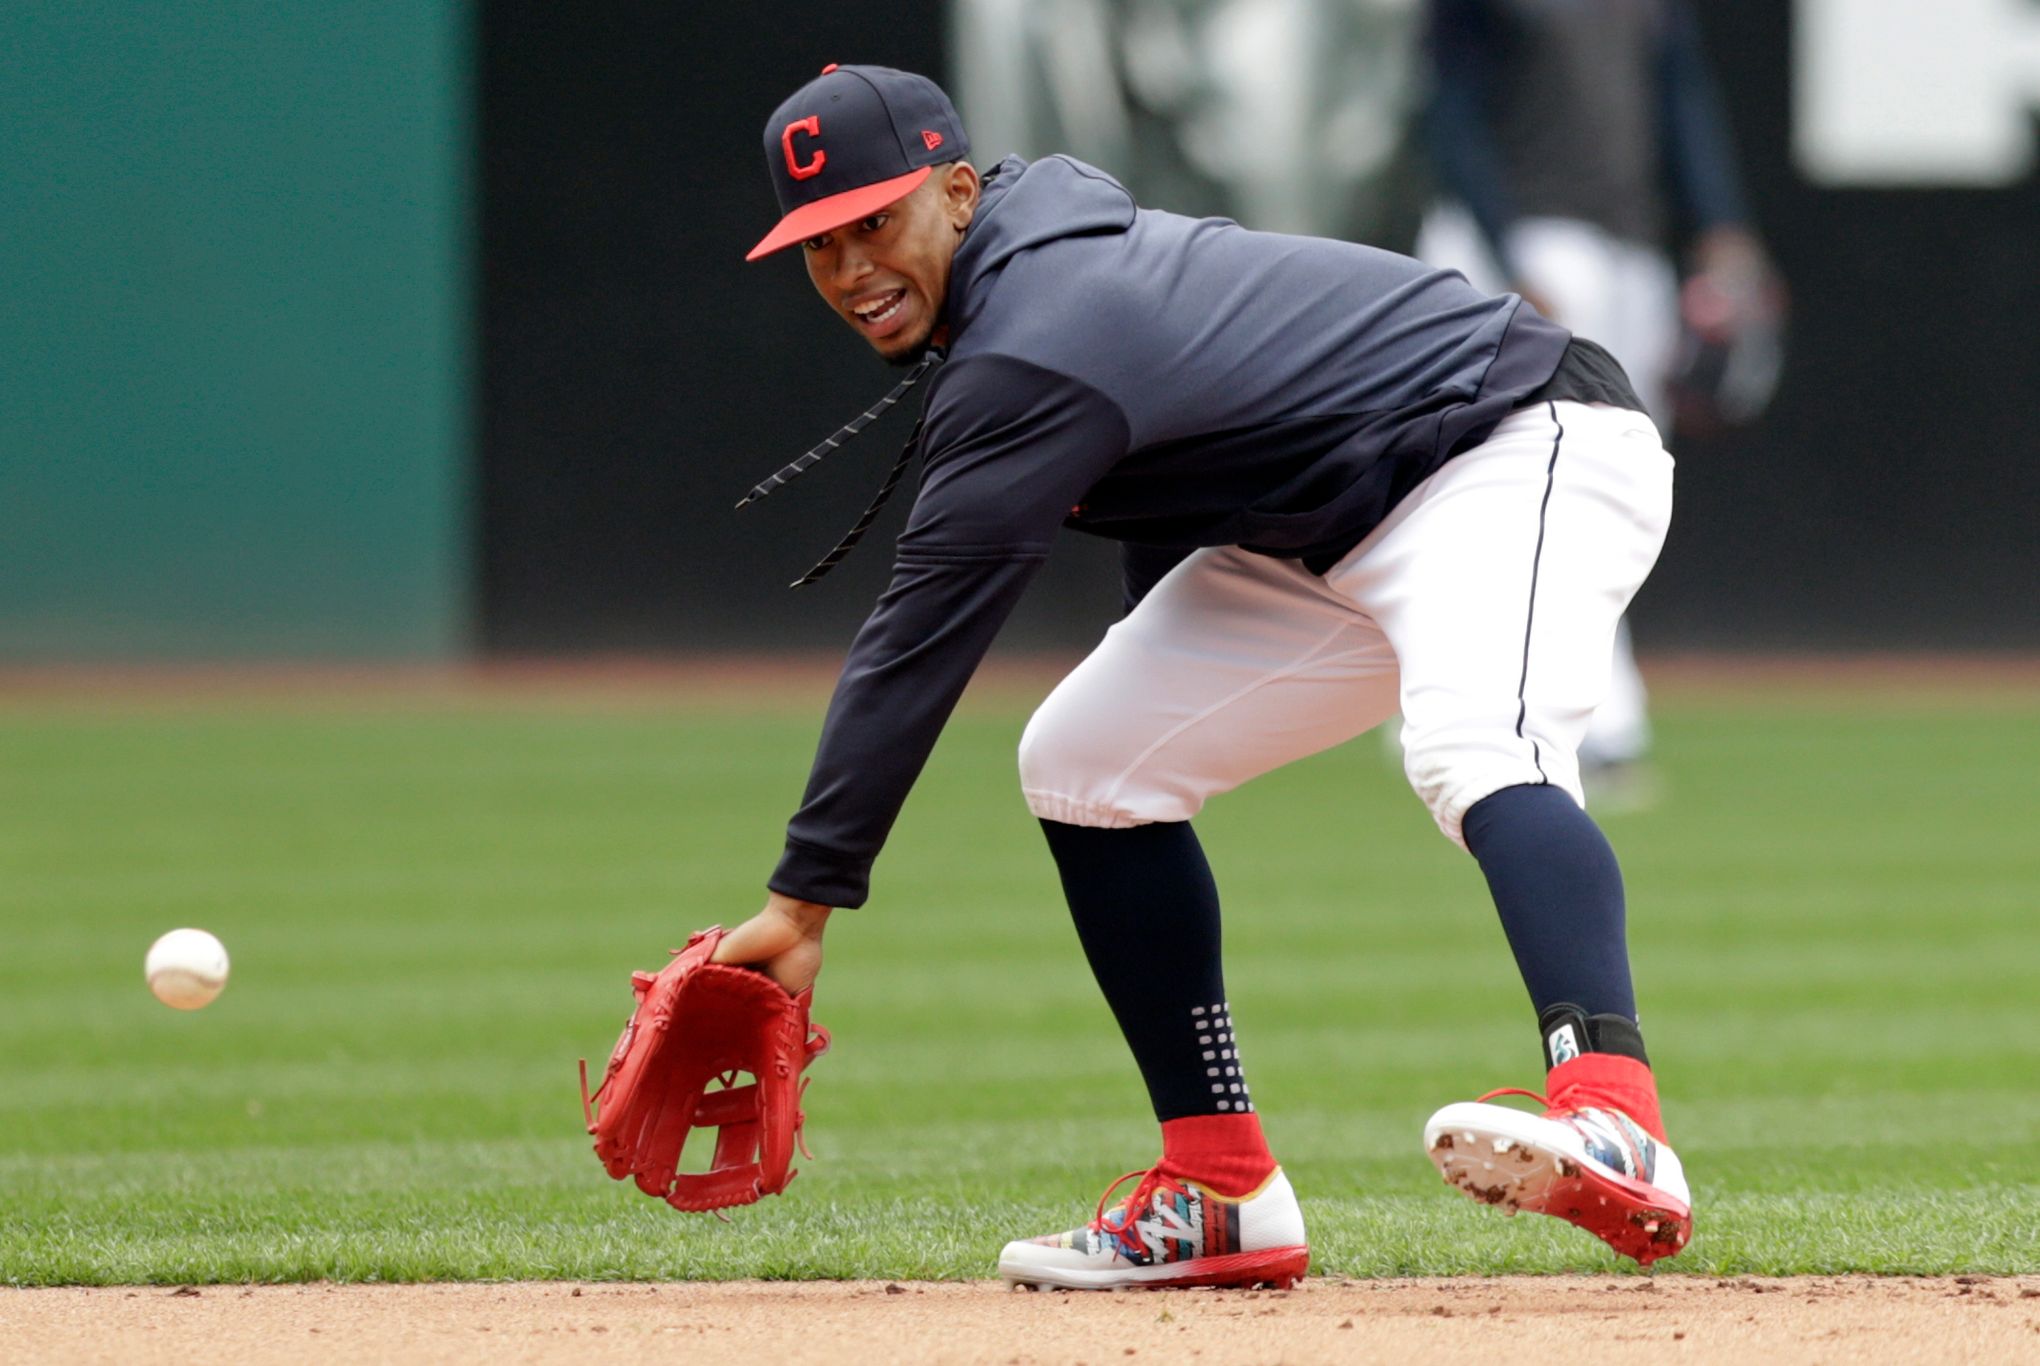 All-Star Lindor cherishing return to Indians after injuries